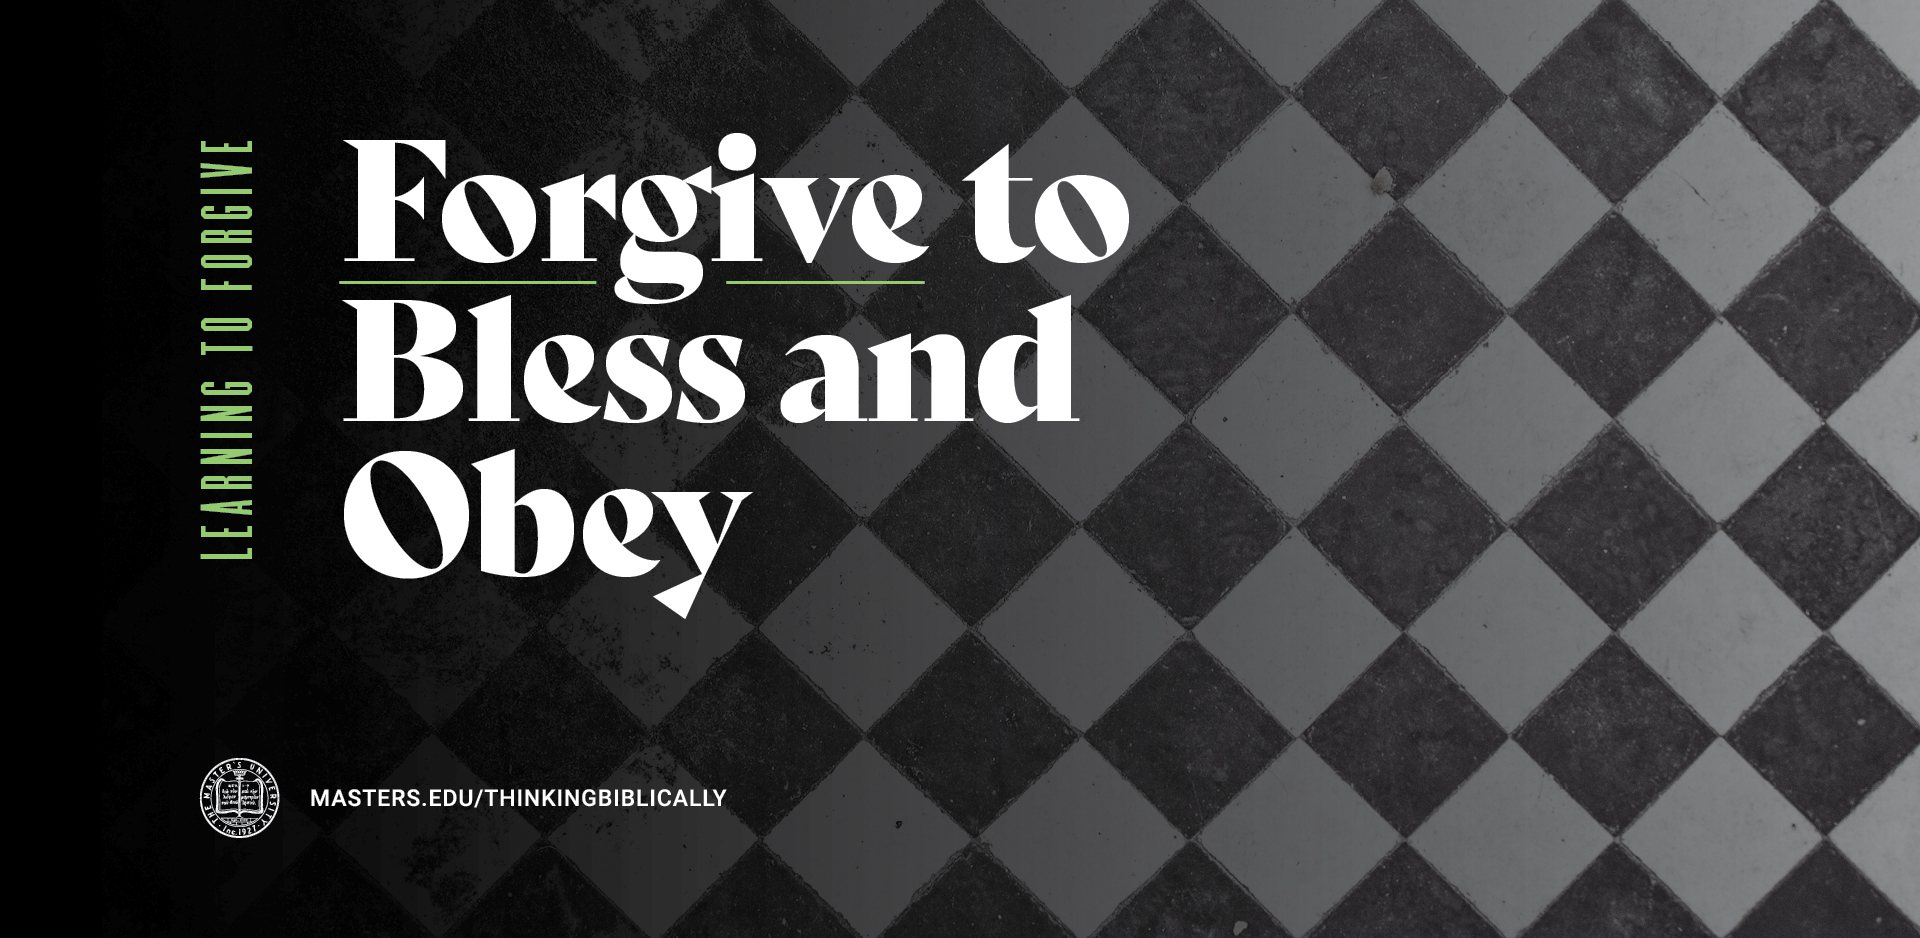 Forgive to Bless and Obey Featured Image